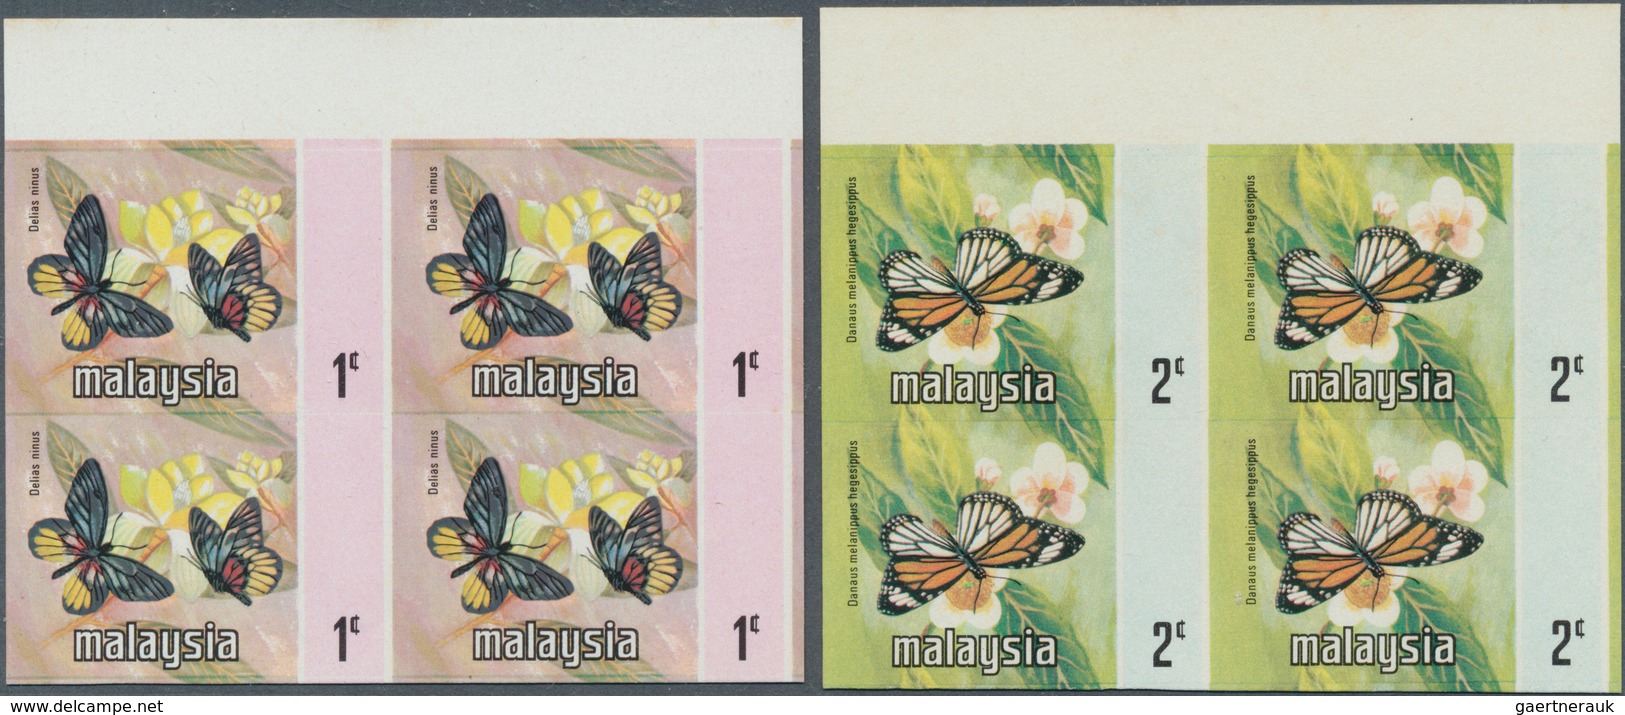 07508 Malaysia: 1971, Butterflies set of seven for the different Malayan States with BLACK OMITTED (countr